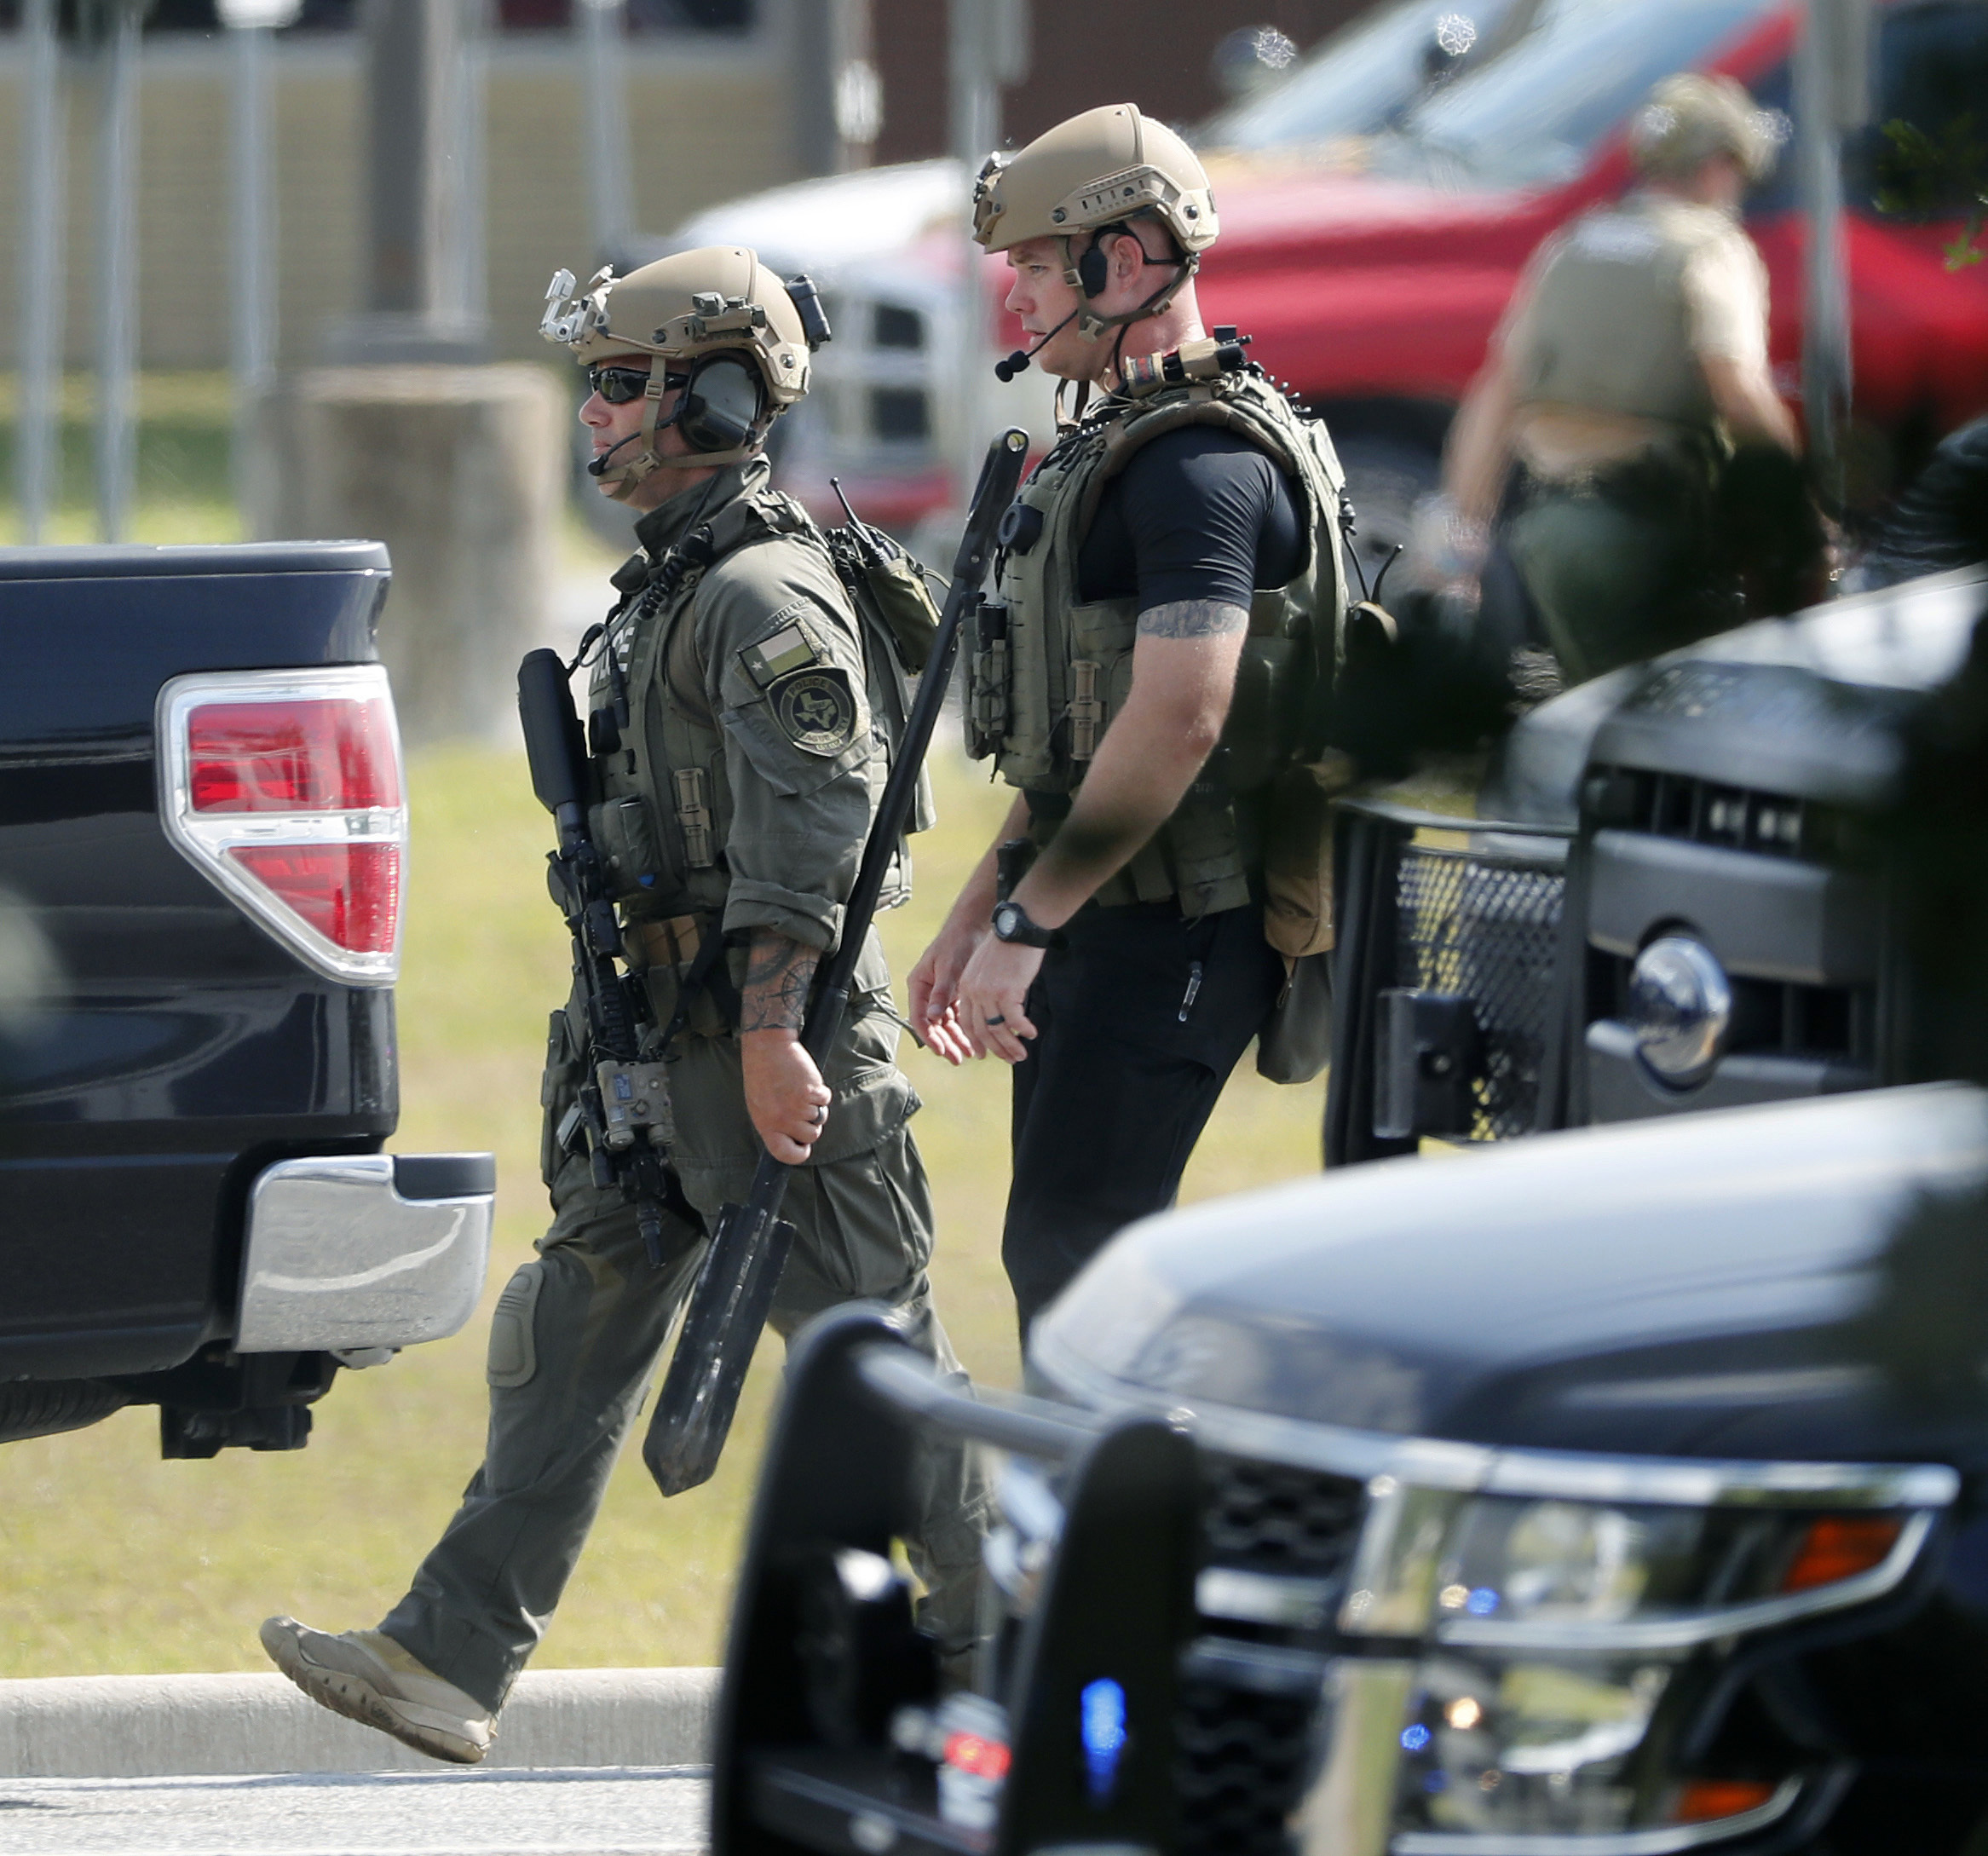 PHOTO: Police officers in tactical gear move through the scene at Santa Fe High School after a shooting on May 18, 2018, in Santa Fe, Texas.